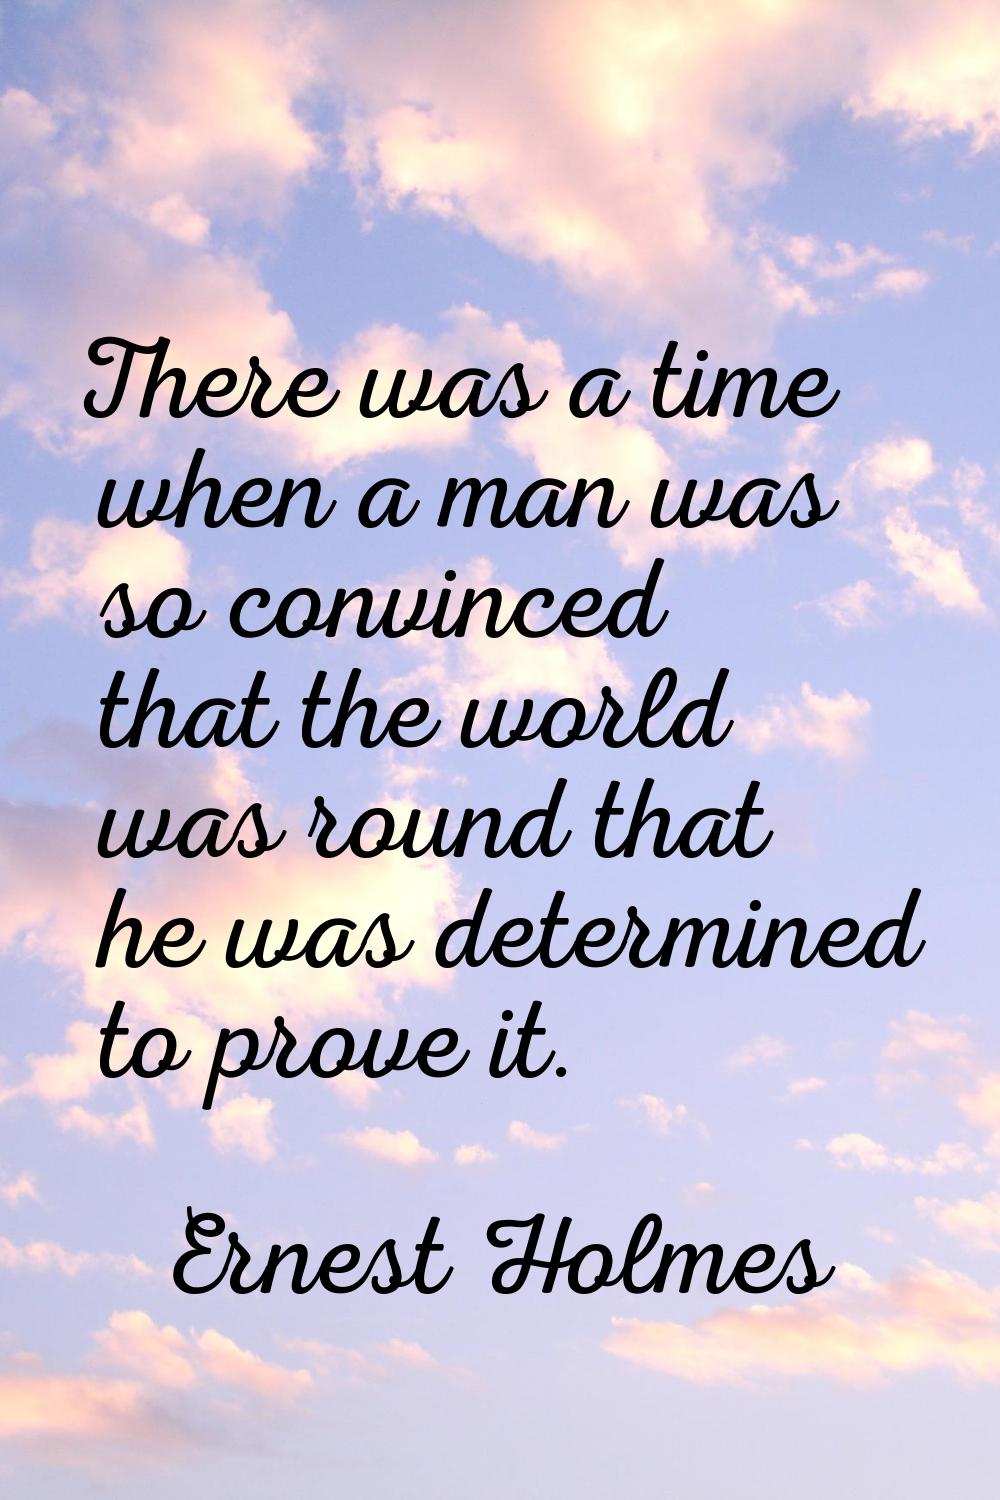 There was a time when a man was so convinced that the world was round that he was determined to pro